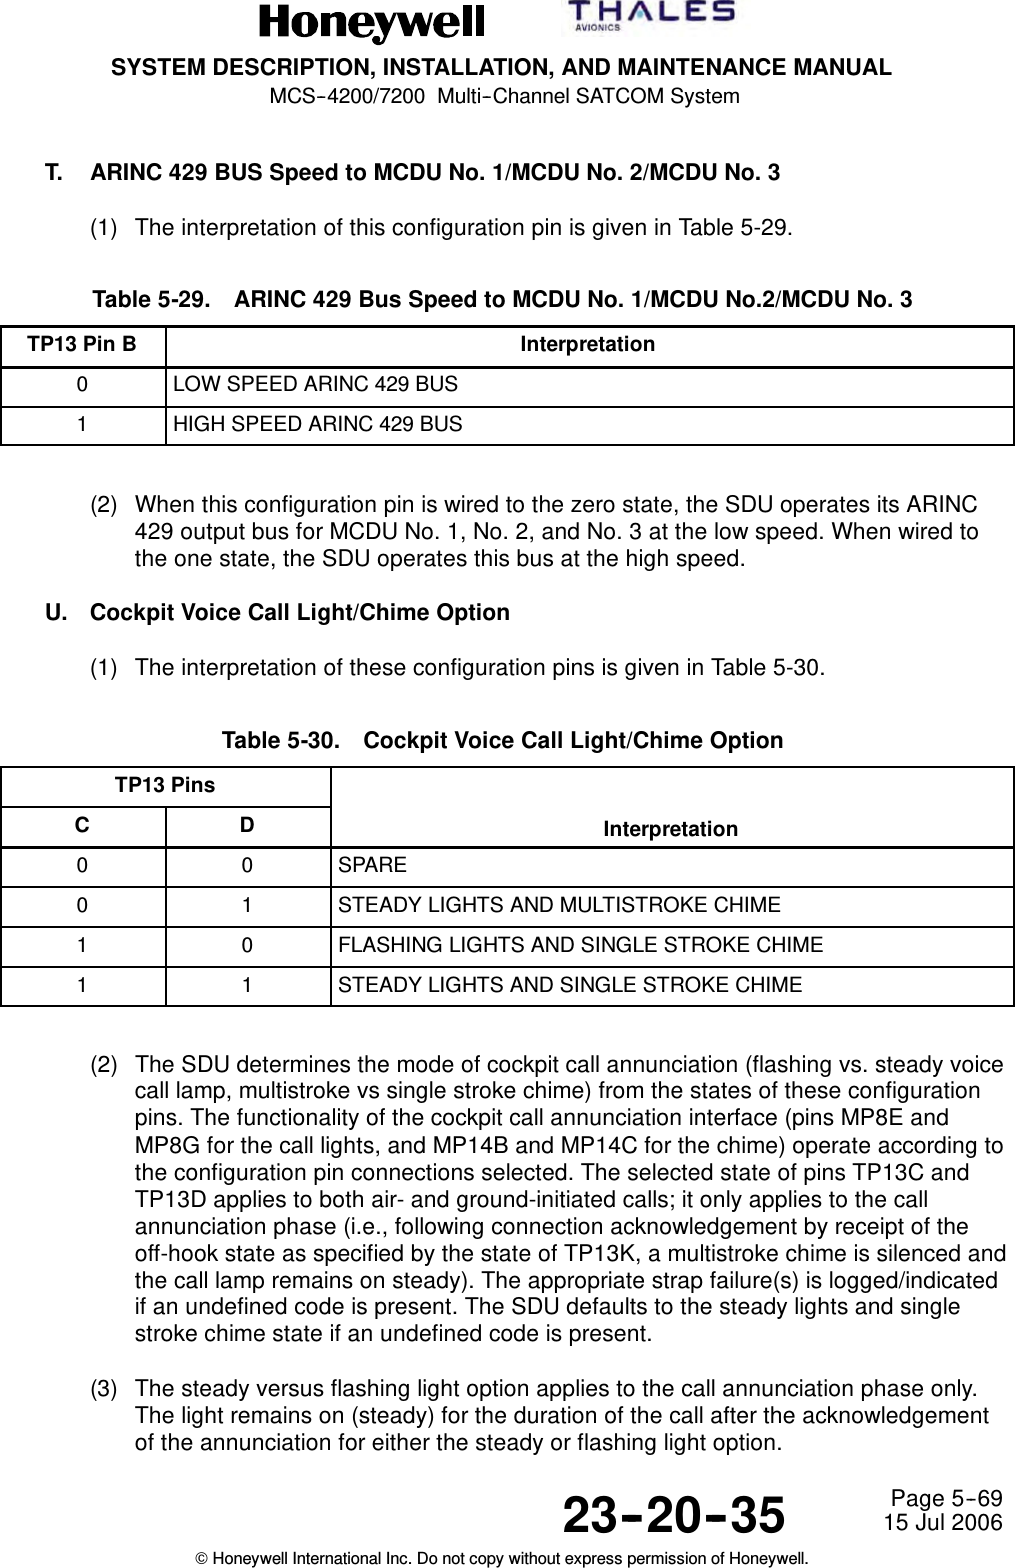 SYSTEM DESCRIPTION, INSTALLATION, AND MAINTENANCE MANUALMCS--4200/7200 Multi--Channel SATCOM System23--20--35 15 Jul 2006Honeywell International Inc. Do not copy without express permission of Honeywell.Page 5--69T. ARINC 429 BUS Speed to MCDU No. 1/MCDU No. 2/MCDU No. 3(1) The interpretation of this configuration pin is given in Table 5-29.Table 5-29. ARINC 429 Bus Speed to MCDU No. 1/MCDU No.2/MCDU No. 3TP13 Pin B Interpretation0LOW SPEED ARINC 429 BUS1HIGH SPEED ARINC 429 BUS(2) When this configuration pin is wired to the zero state, the SDU operates its ARINC429 output bus for MCDU No. 1, No. 2, and No. 3 at the low speed. When wired tothe one state, the SDU operates this bus at the high speed.U. Cockpit Voice Call Light/Chime Option(1) The interpretation of these configuration pins is given in Table 5-30.Table 5-30. Cockpit Voice Call Light/Chime OptionTP13 PinsC D Interpretation0 0 SPARE0 1 STEADY LIGHTS AND MULTISTROKE CHIME1 0 FLASHING LIGHTS AND SINGLE STROKE CHIME1 1 STEADY LIGHTS AND SINGLE STROKE CHIME(2) The SDU determines the mode of cockpit call annunciation (flashing vs. steady voicecall lamp, multistroke vs single stroke chime) from the states of these configurationpins. The functionality of the cockpit call annunciation interface (pins MP8E andMP8G for the call lights, and MP14B and MP14C for the chime) operate according tothe configuration pin connections selected. The selected state of pins TP13C andTP13D applies to both air- and ground-initiated calls; it only applies to the callannunciation phase (i.e., following connection acknowledgement by receipt of theoff-hook state as specified by the state of TP13K, a multistroke chime is silenced andthe call lamp remains on steady). The appropriate strap failure(s) is logged/indicatedif an undefined code is present. The SDU defaults to the steady lights and singlestroke chime state if an undefined code is present.(3) The steady versus flashing light option applies to the call annunciation phase only.The light remains on (steady) for the duration of the call after the acknowledgementof the annunciation for either the steady or flashing light option.